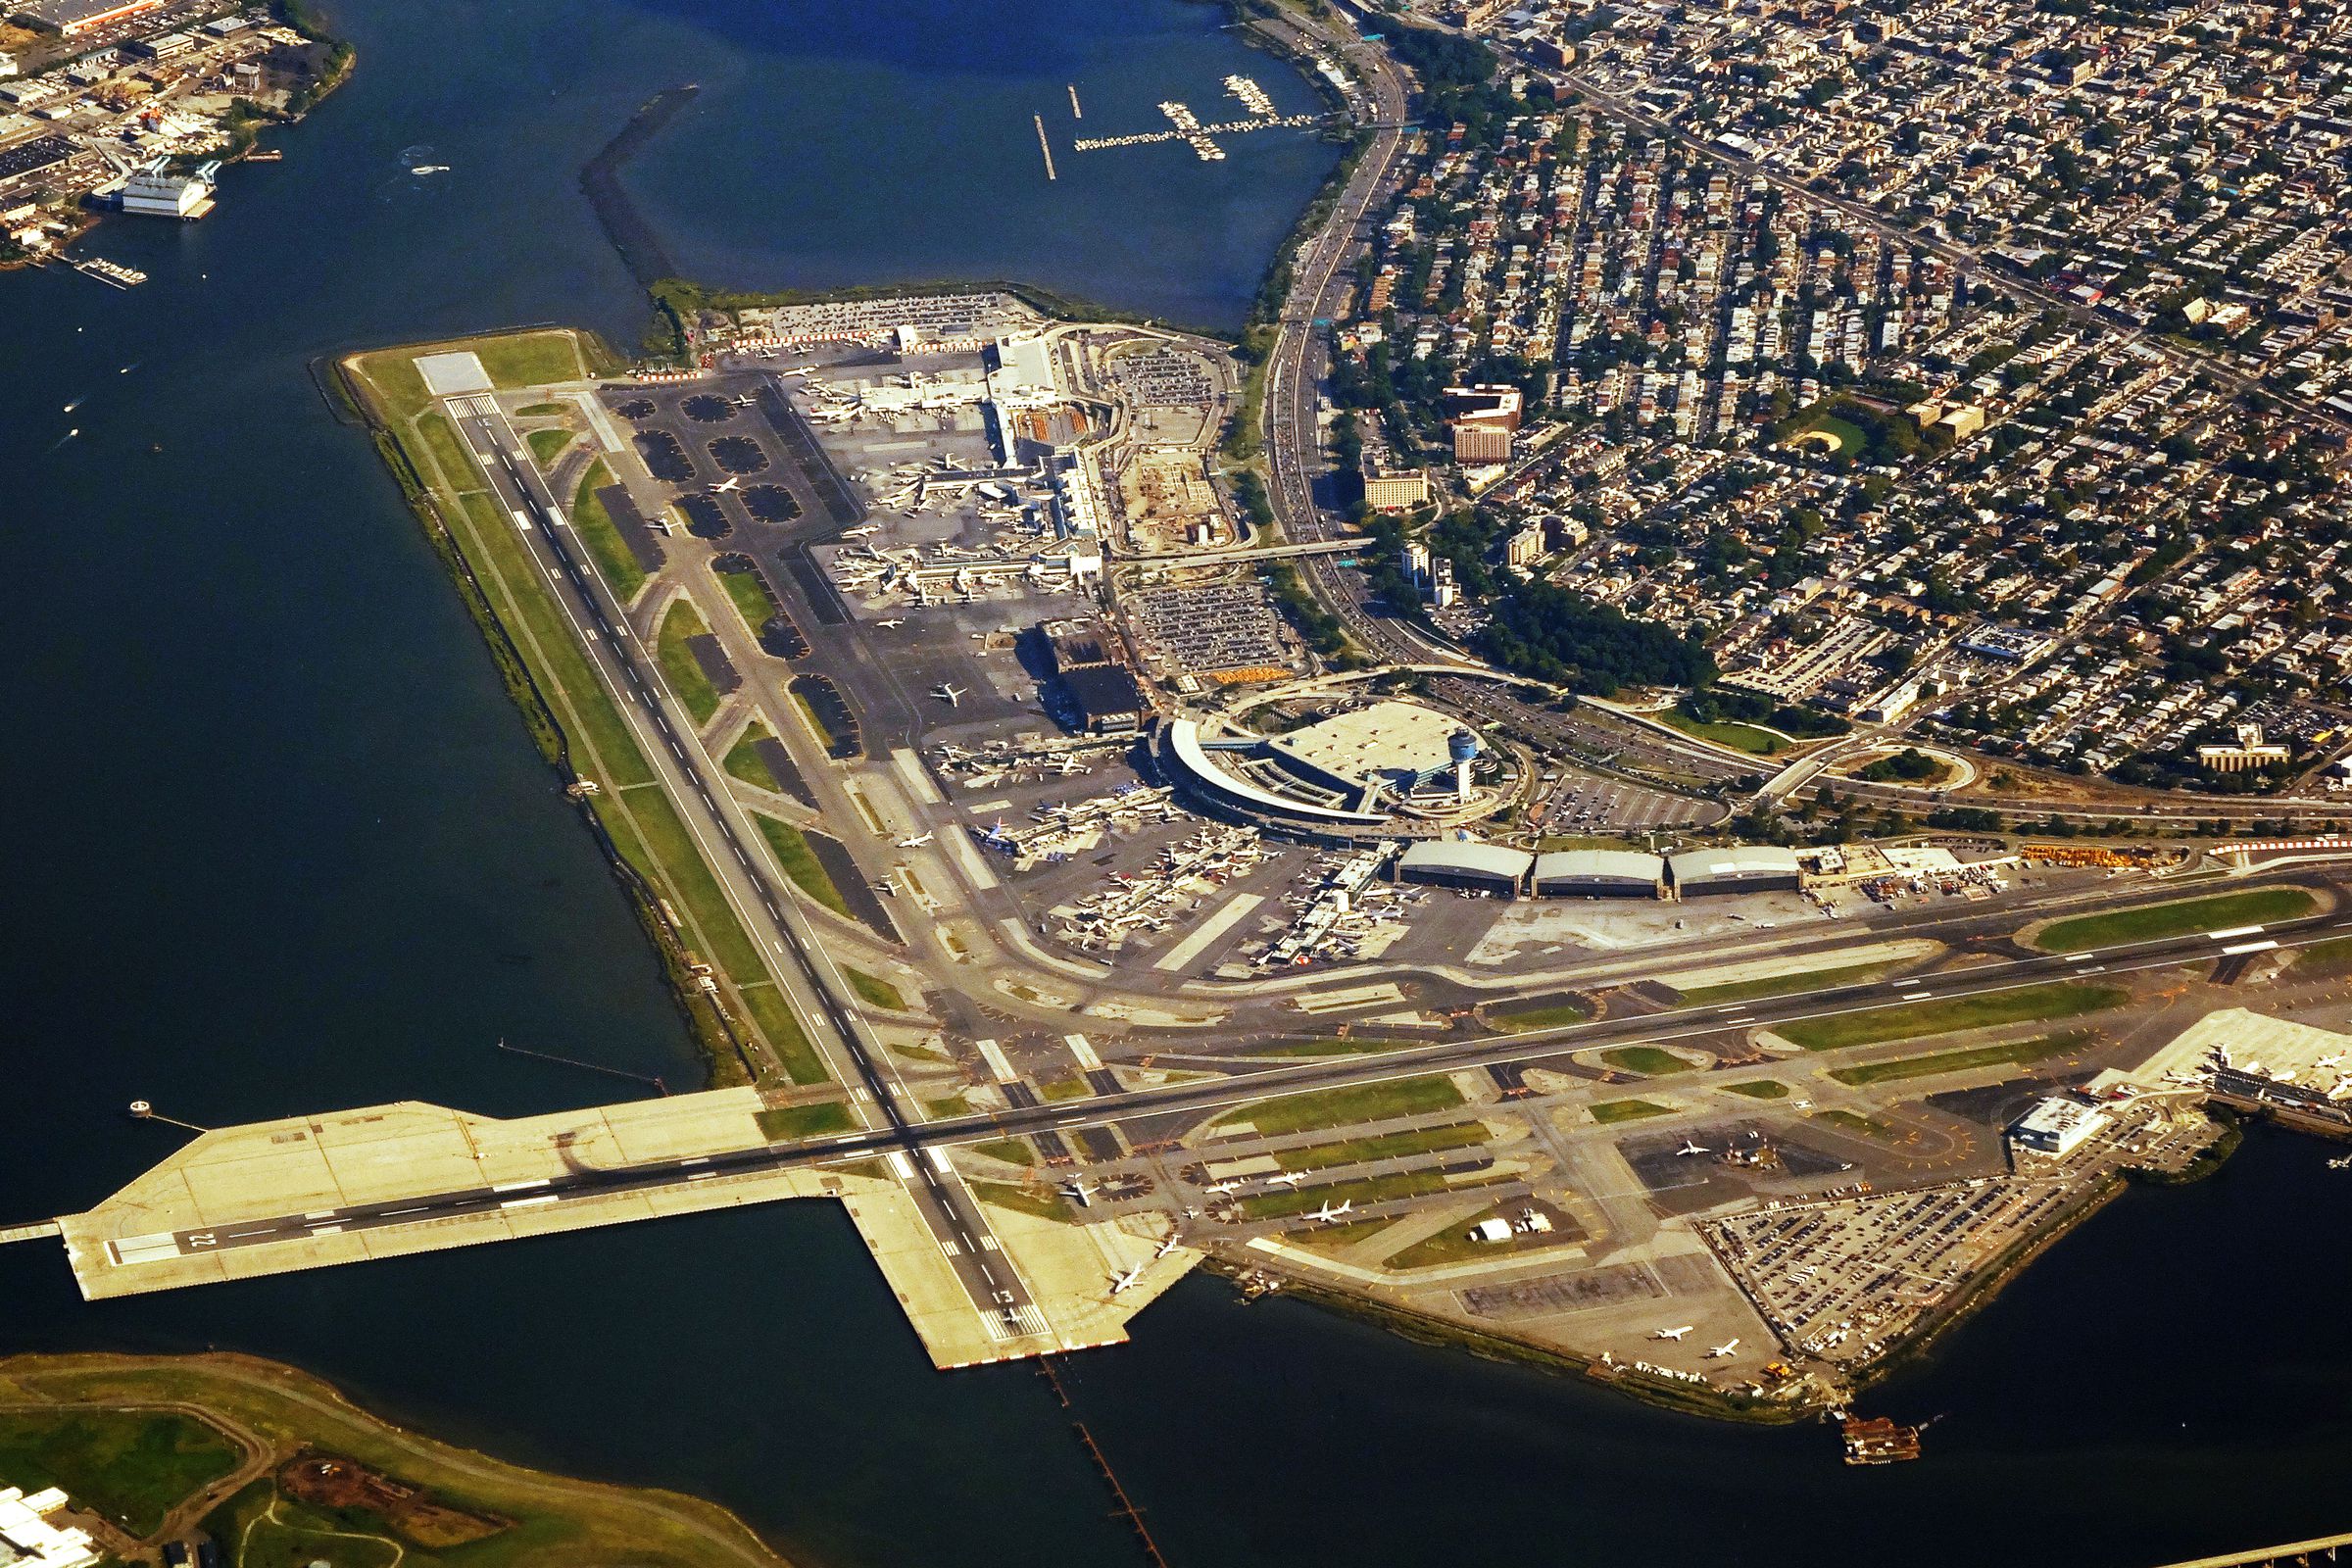 More than half of LaGuardia airport in NYC could be “premanently flooded” with a three-foot sea level rise.